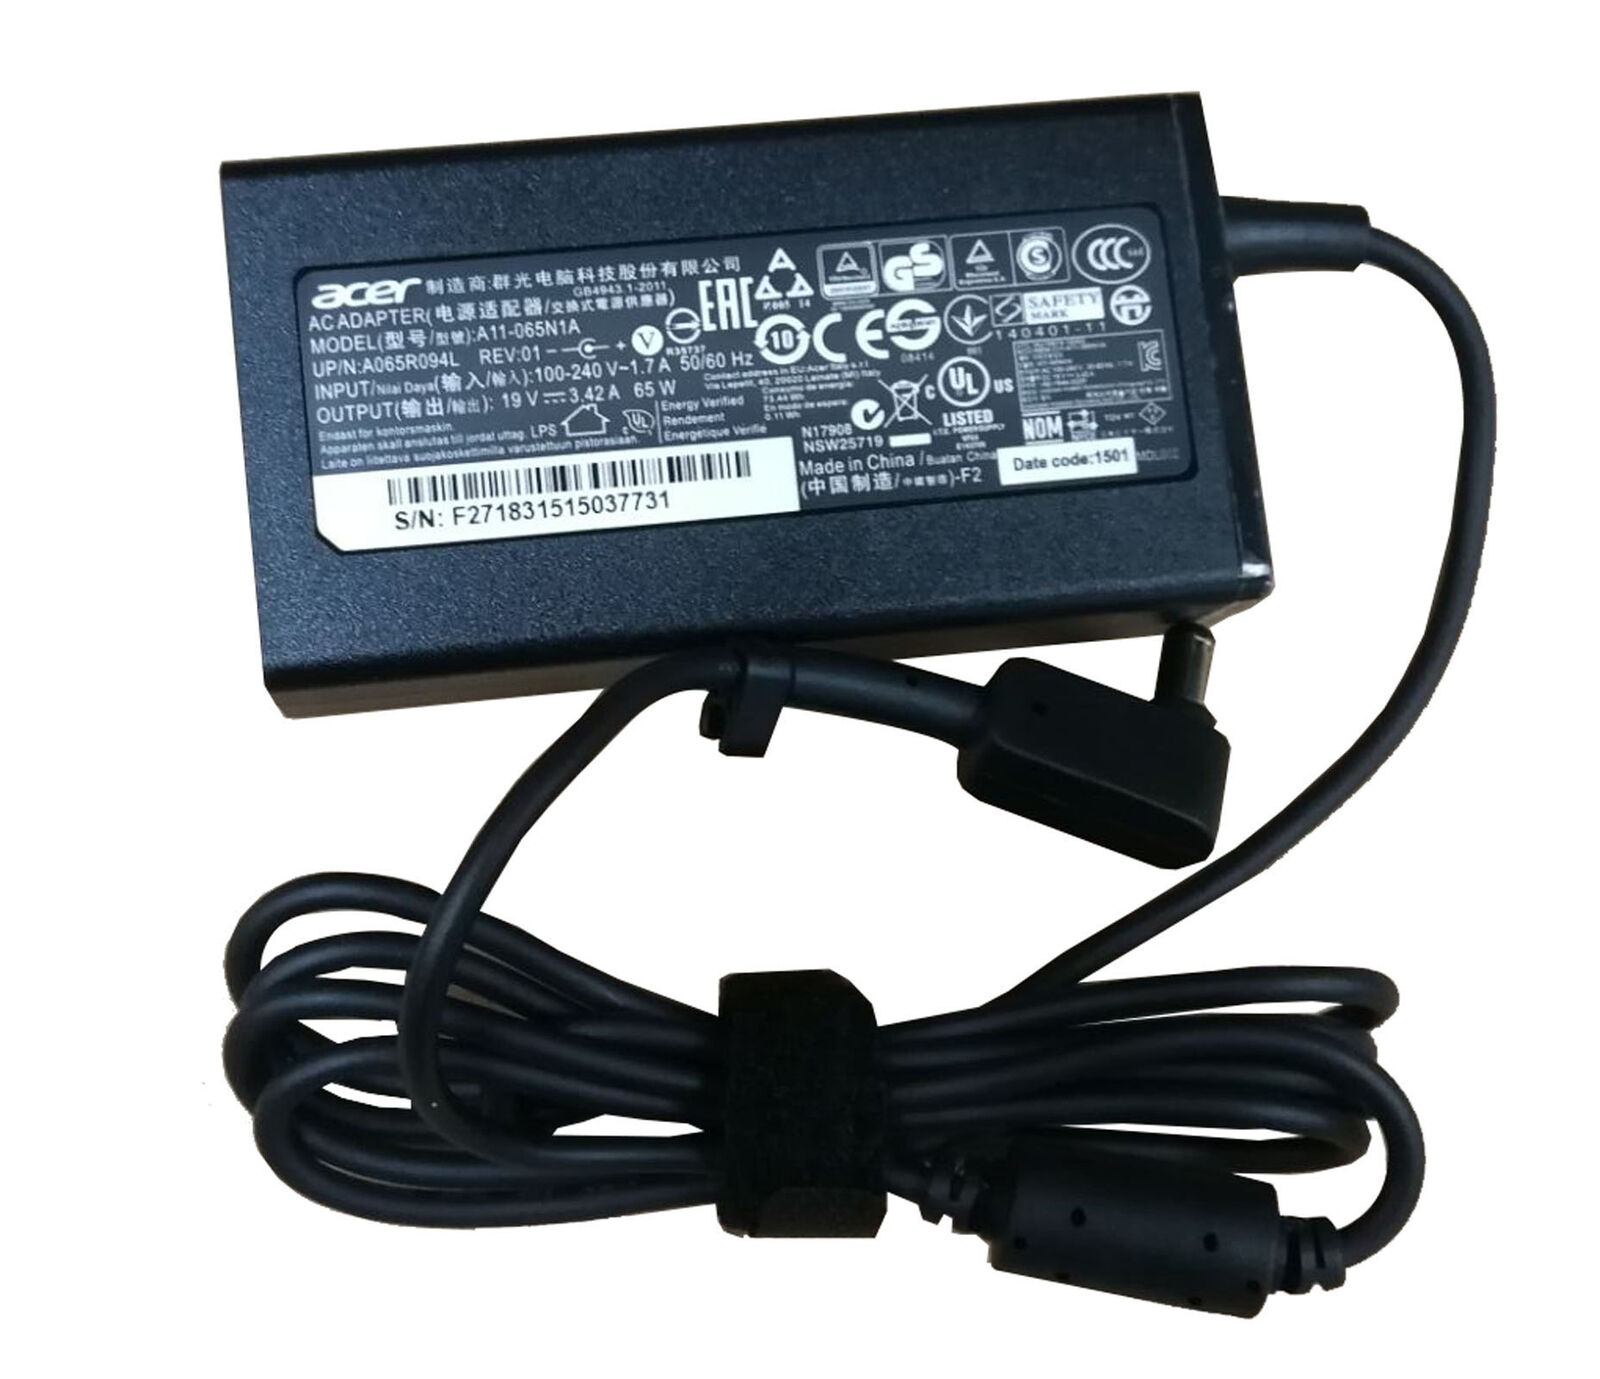 65W Acer Chromebook C720-2802 Charger AC Adapter Power Cord